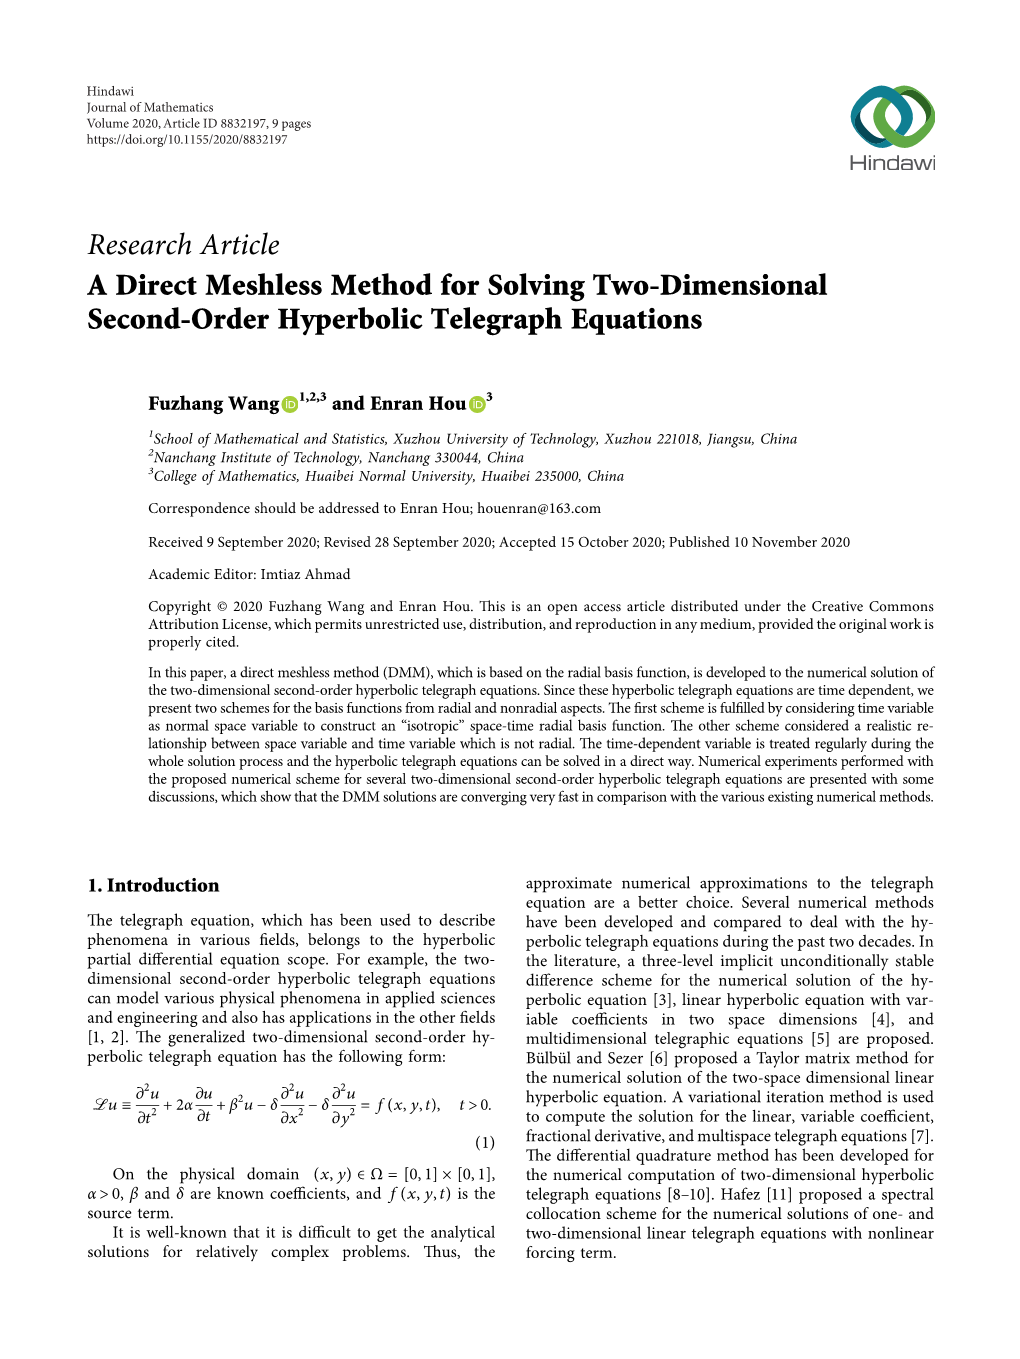 A Direct Meshless Method for Solving Two-Dimensional Second-Order Hyperbolic Telegraph Equations